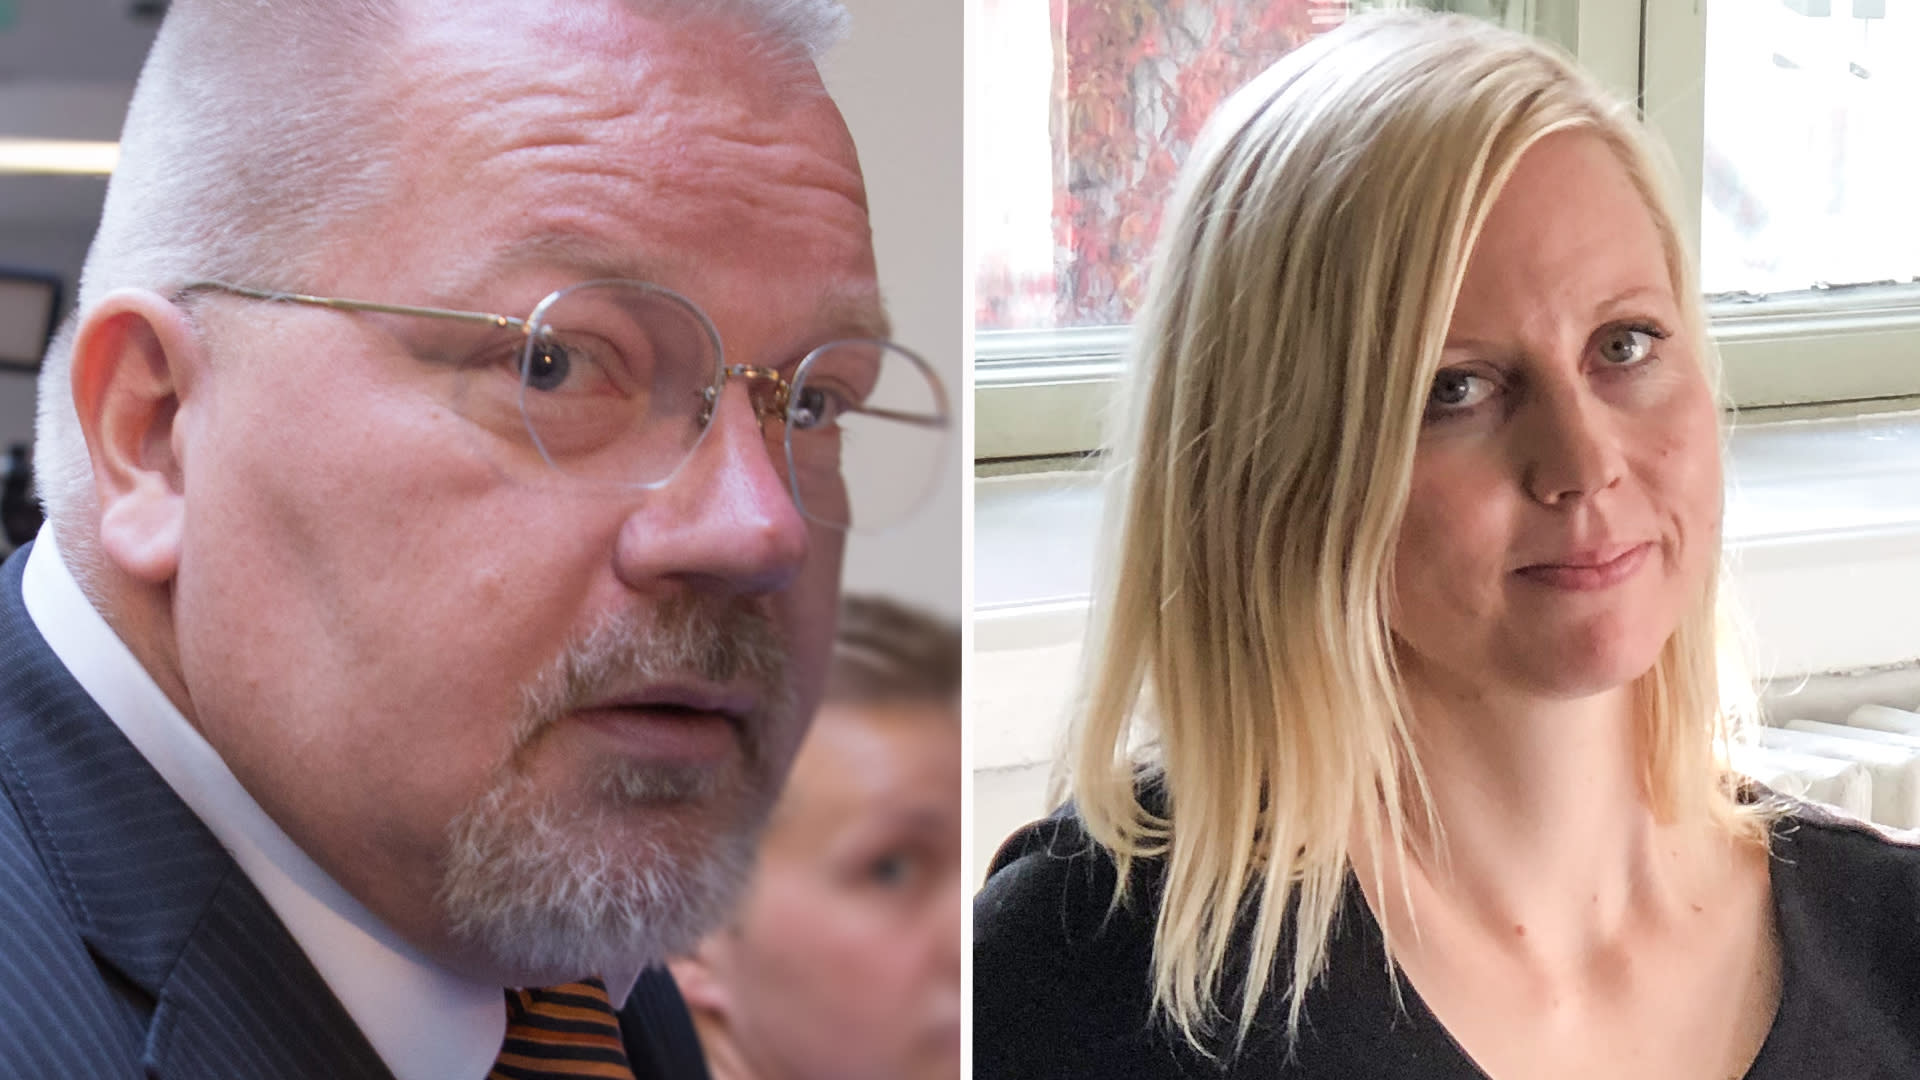 Bäckman received a suspended sentence for persecuting Yle’s journalist